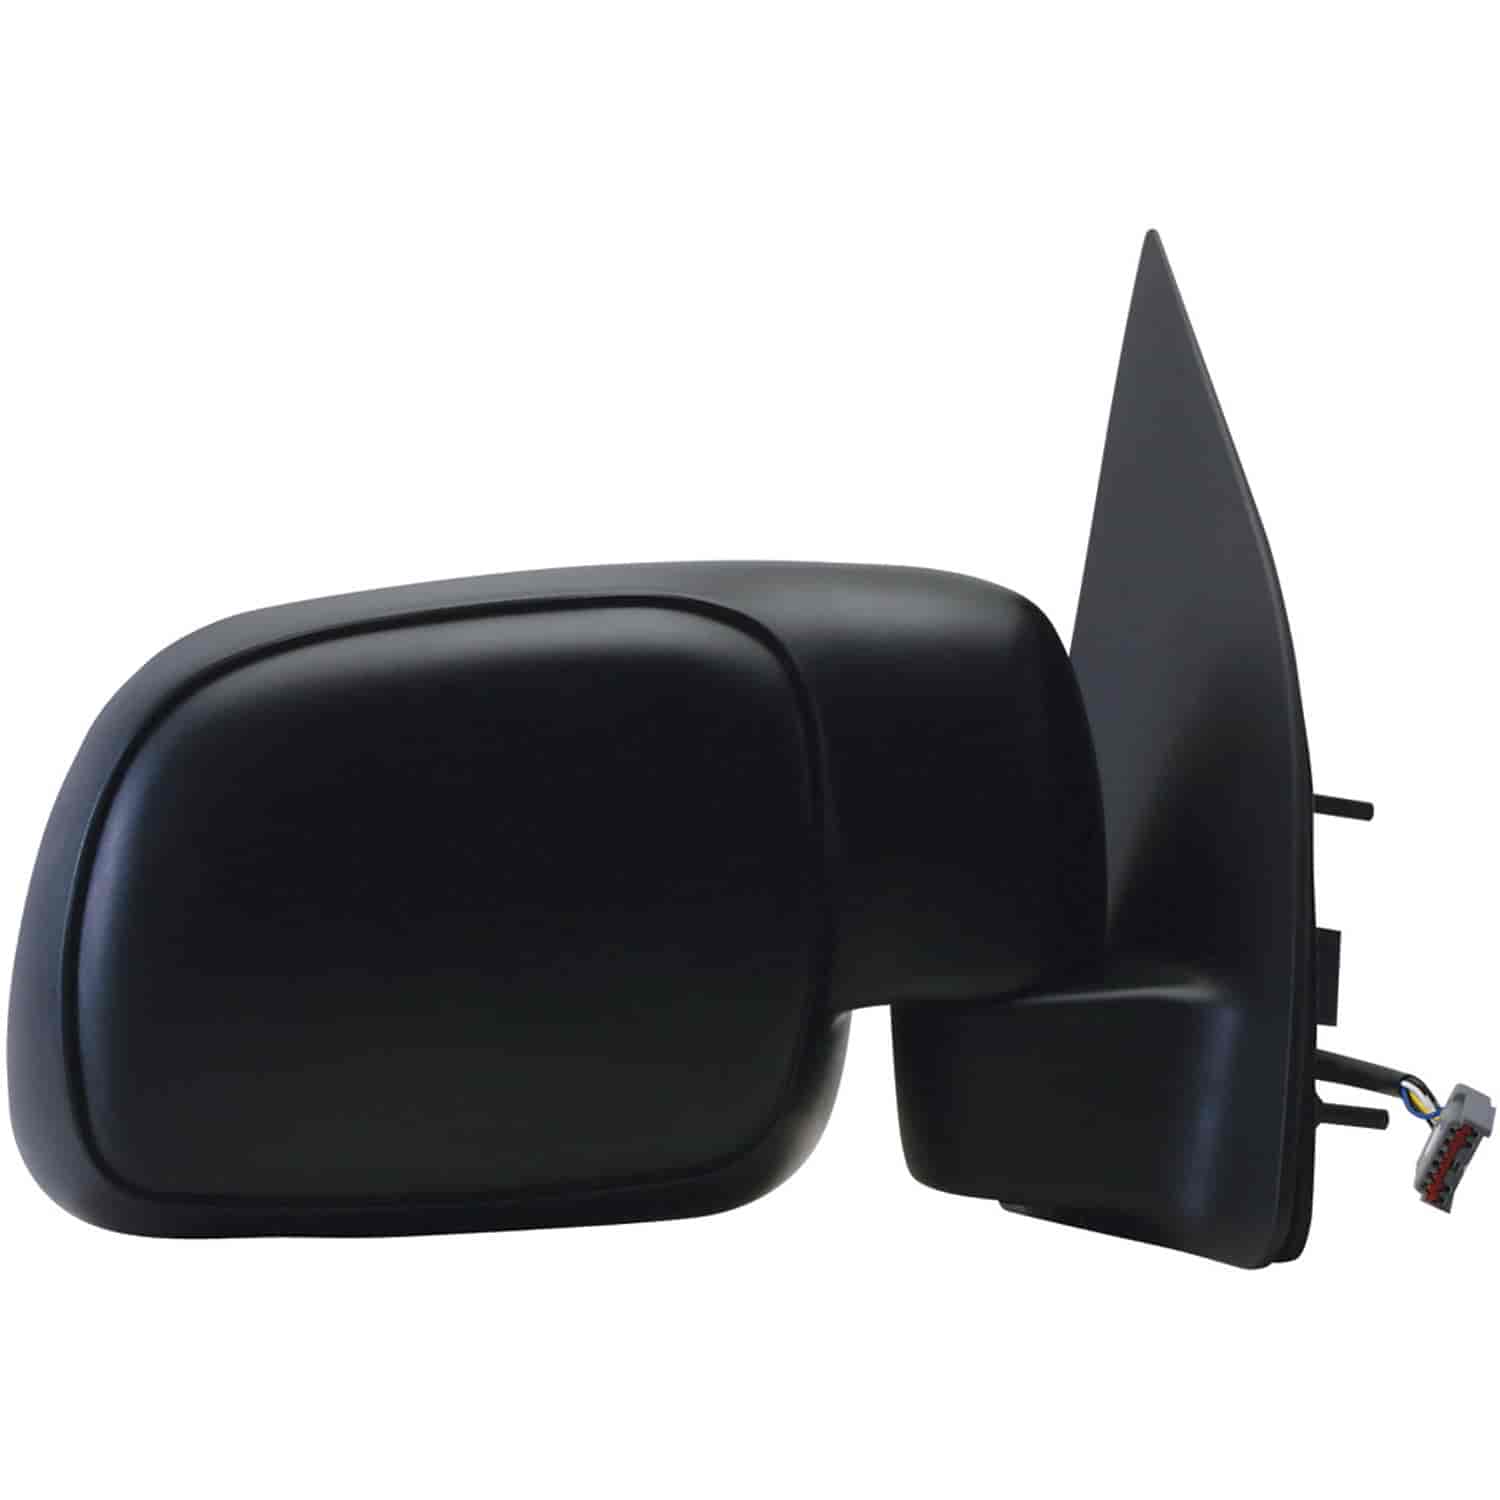 OEM Style Replacement mirror for 01-05 Ford Excursion w/o signal passenger side mirror tested to fit